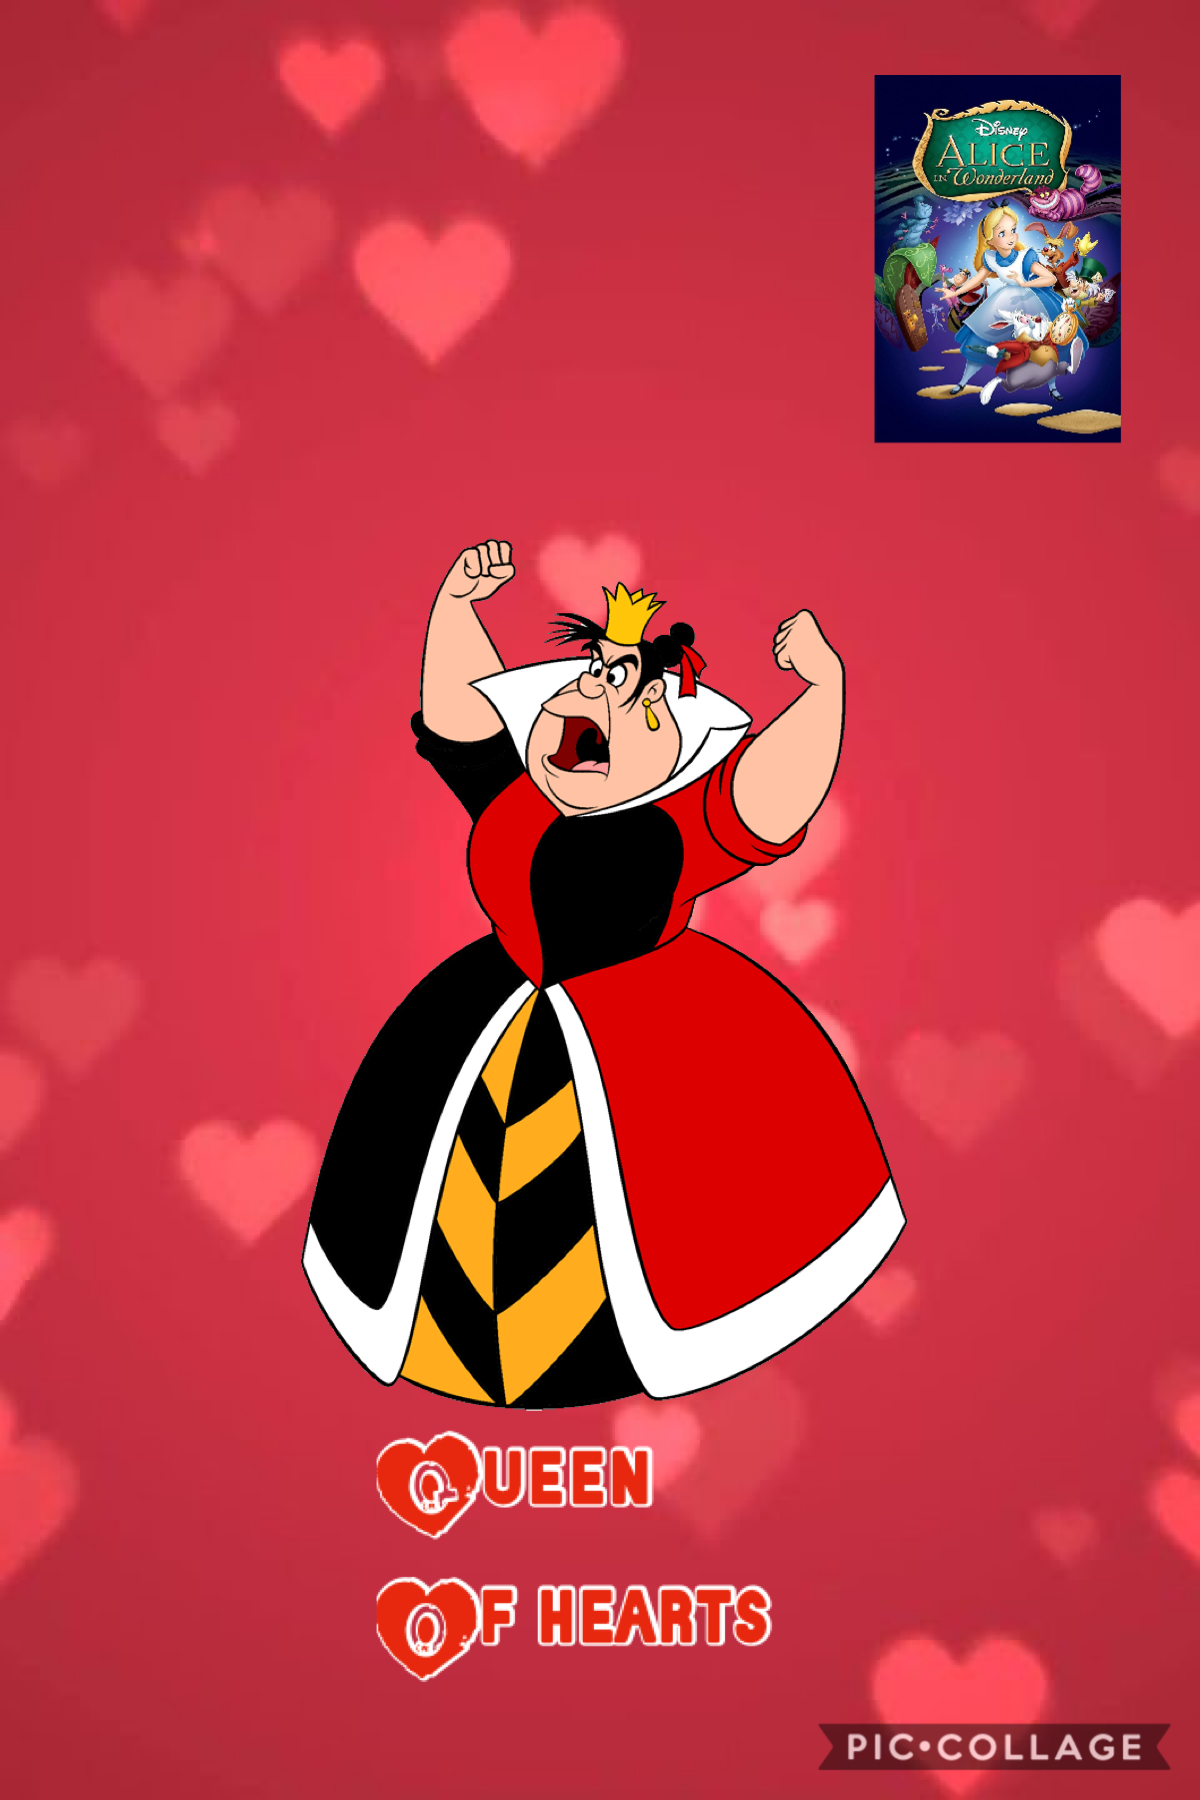 The Disney character of the day is the Queen of heart’s 